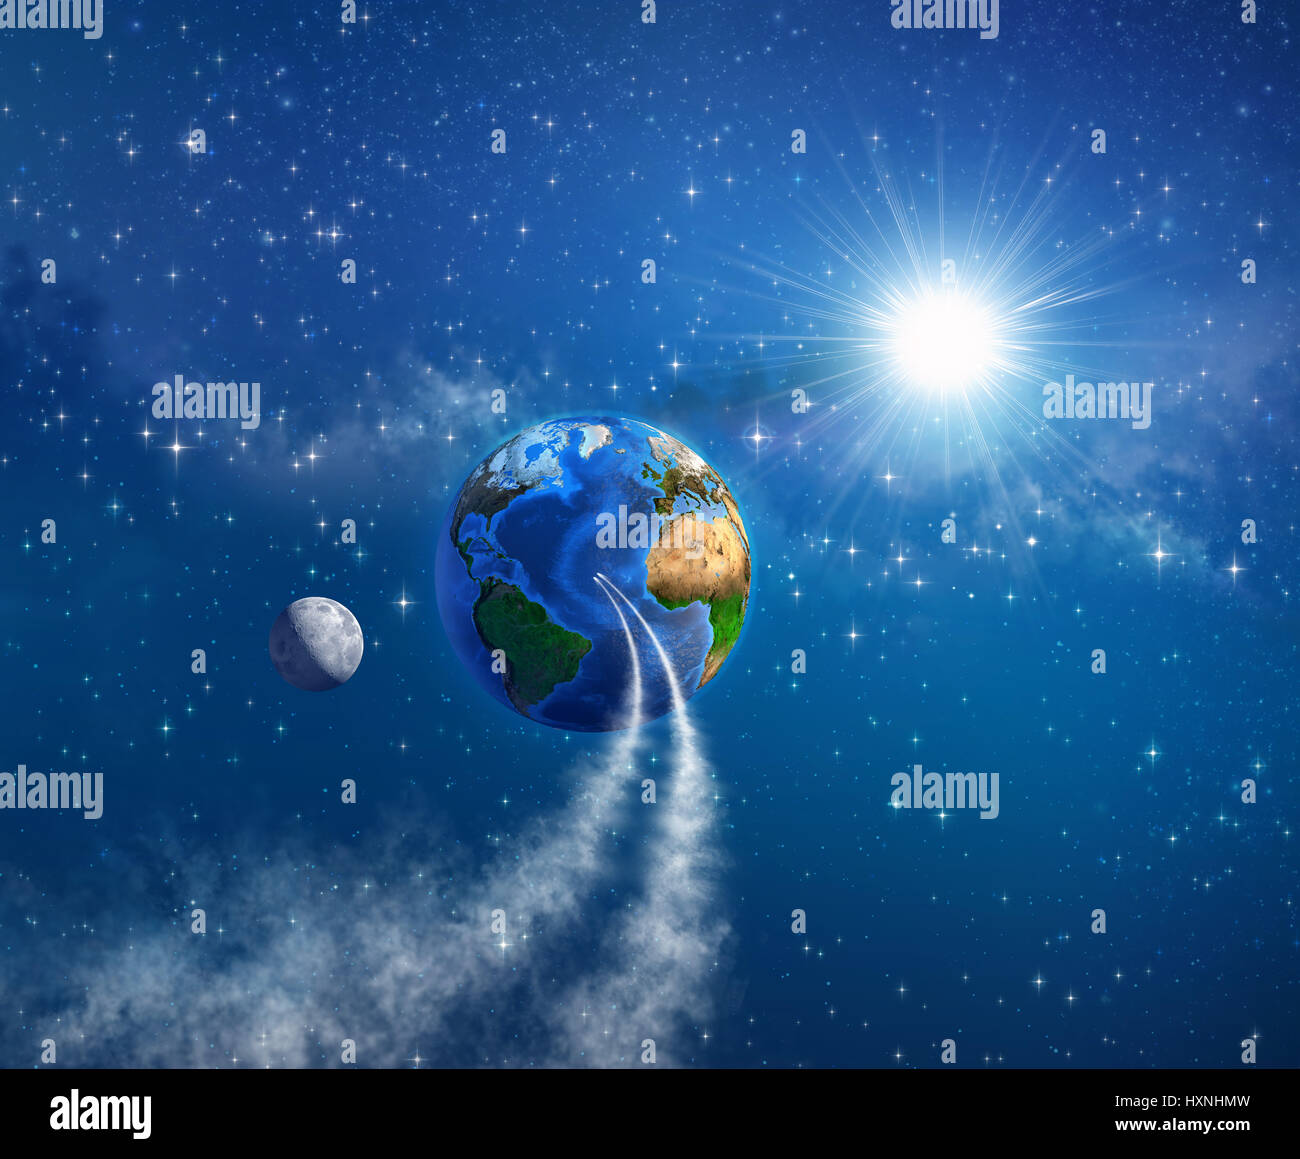 Spaceships landing on planet Earth, sunlight shining behind into deep space. Elements of this image furnished by NASA - 3D illustration. Stock Photo